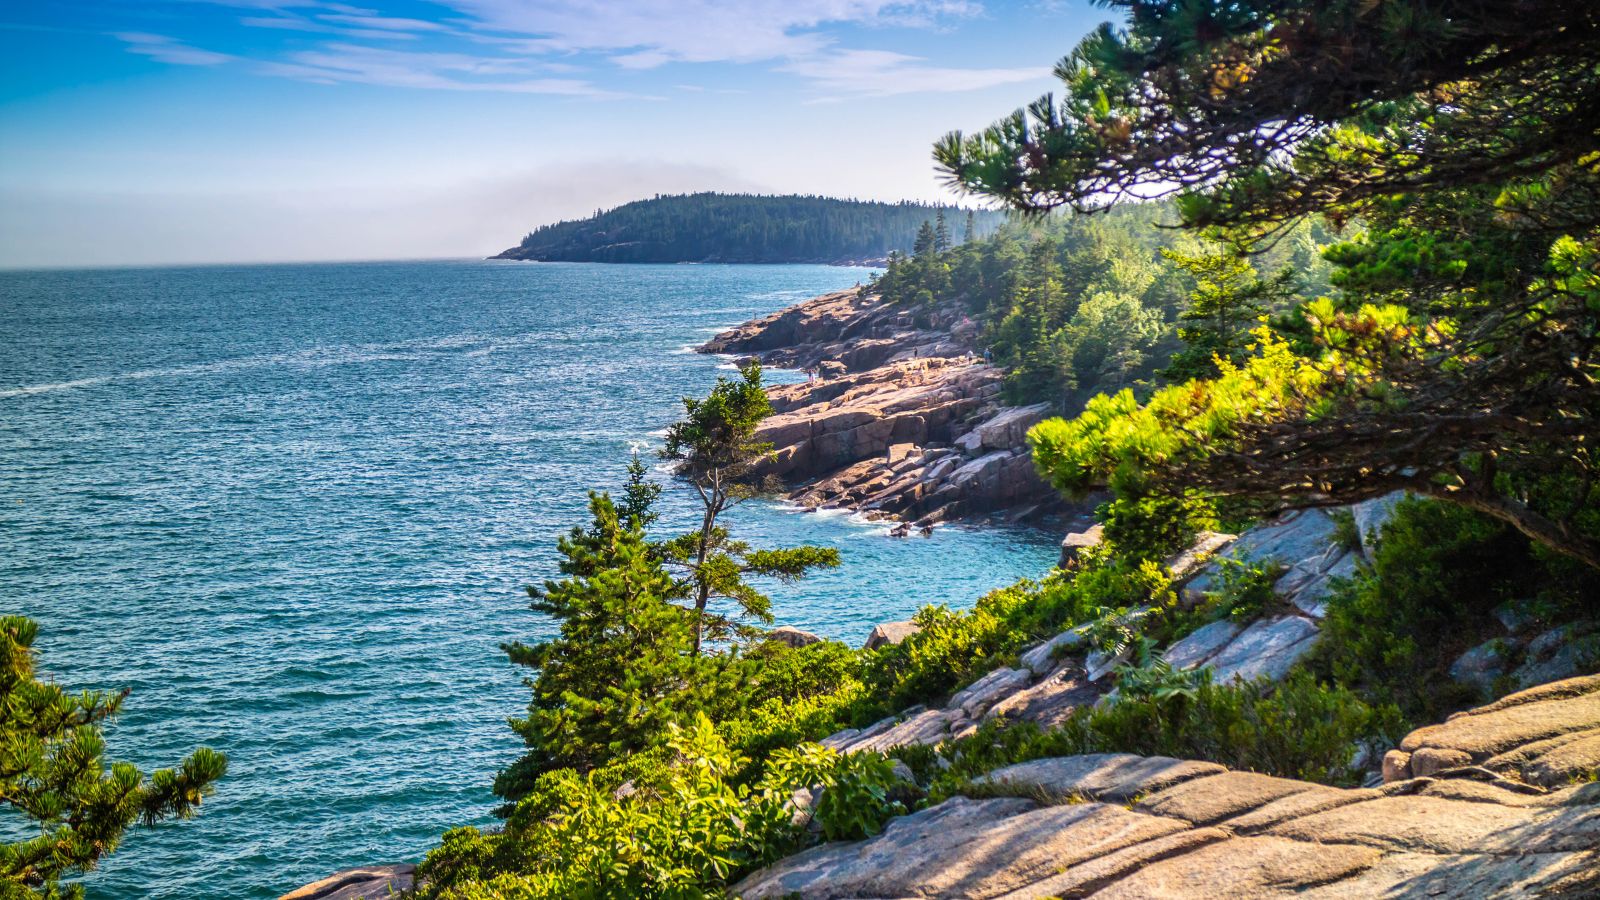 <p>Acadia National Park is a northeastern gem with rocky shores and dense woodlands. Watching the sunrise from Cadillac Mountain is an unforgettable experience. It is near the ocean, so you can enjoy many water activities like fishing and boating. The park also has many <a href="https://www.thewaywardhome.com/free-camping-in-south-dakota/" rel="noopener">camping spots</a> where you can stay overnight.</p>